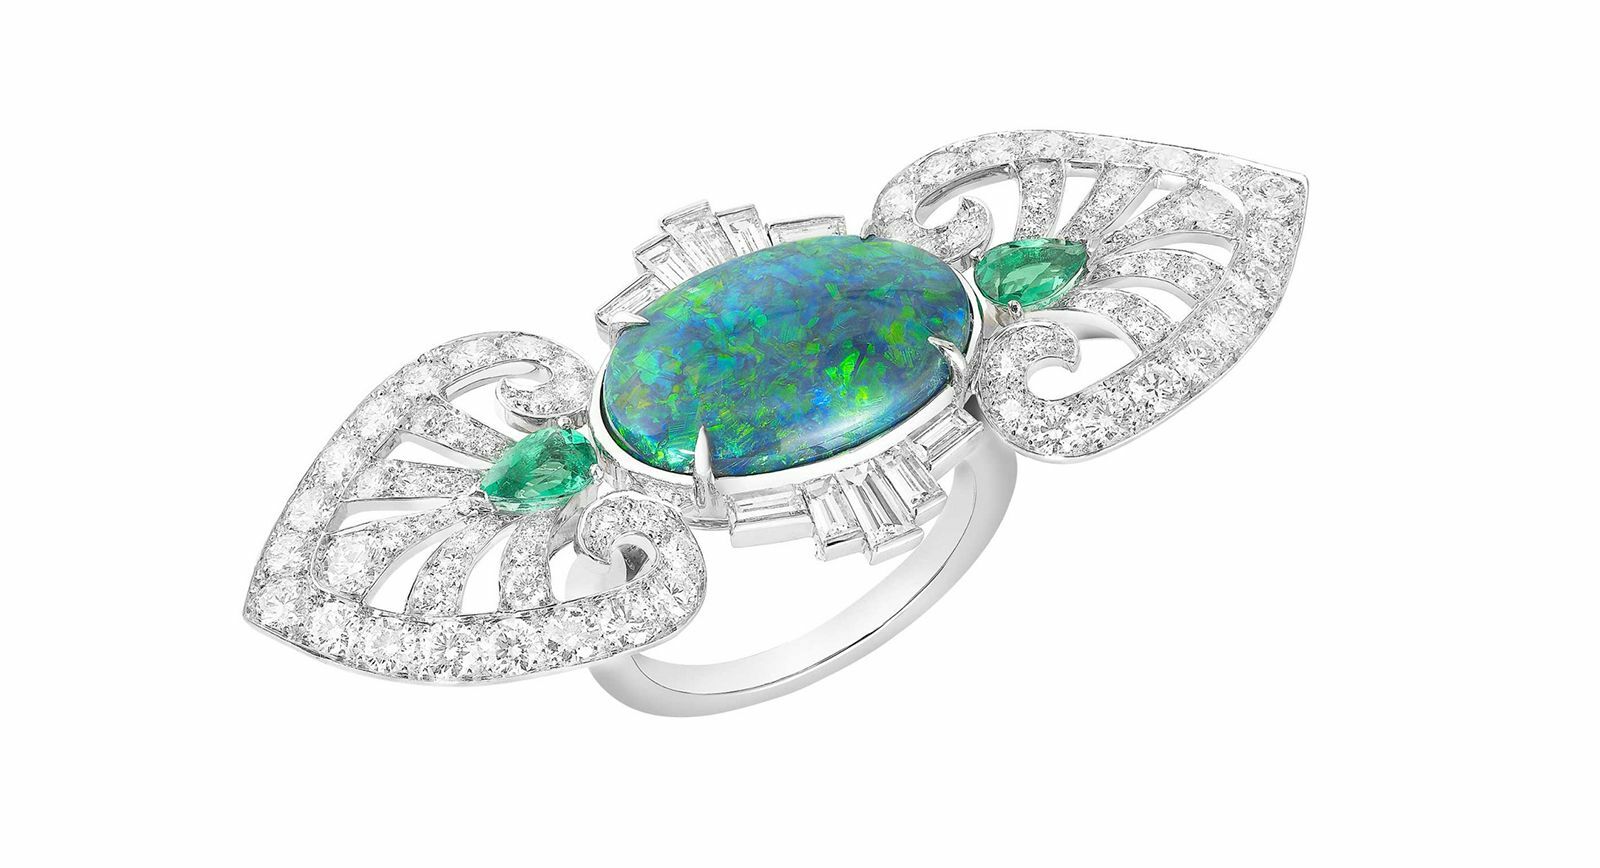 Boucheron Indian Palace Ring with an opal and diamonds